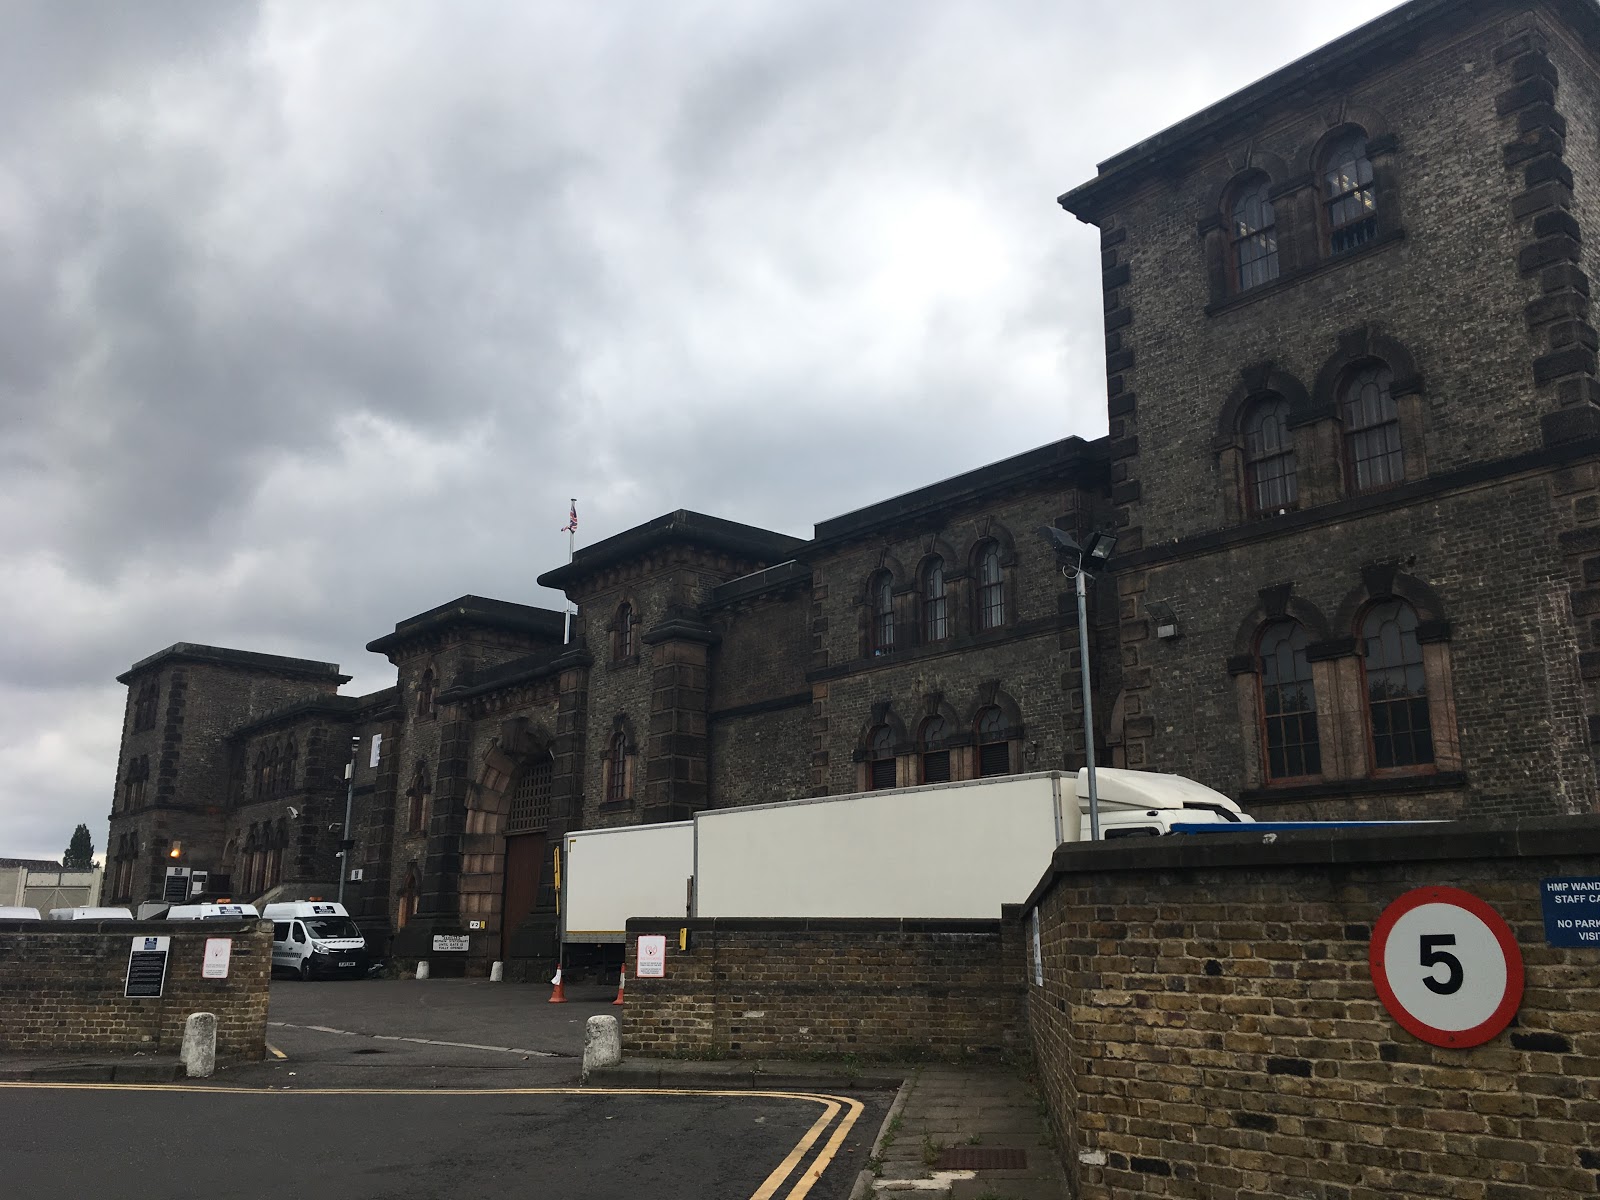 https://whatremovals.co.uk/wp-content/uploads/2022/02/Wandsworth Prison Museum-300x225.jpeg